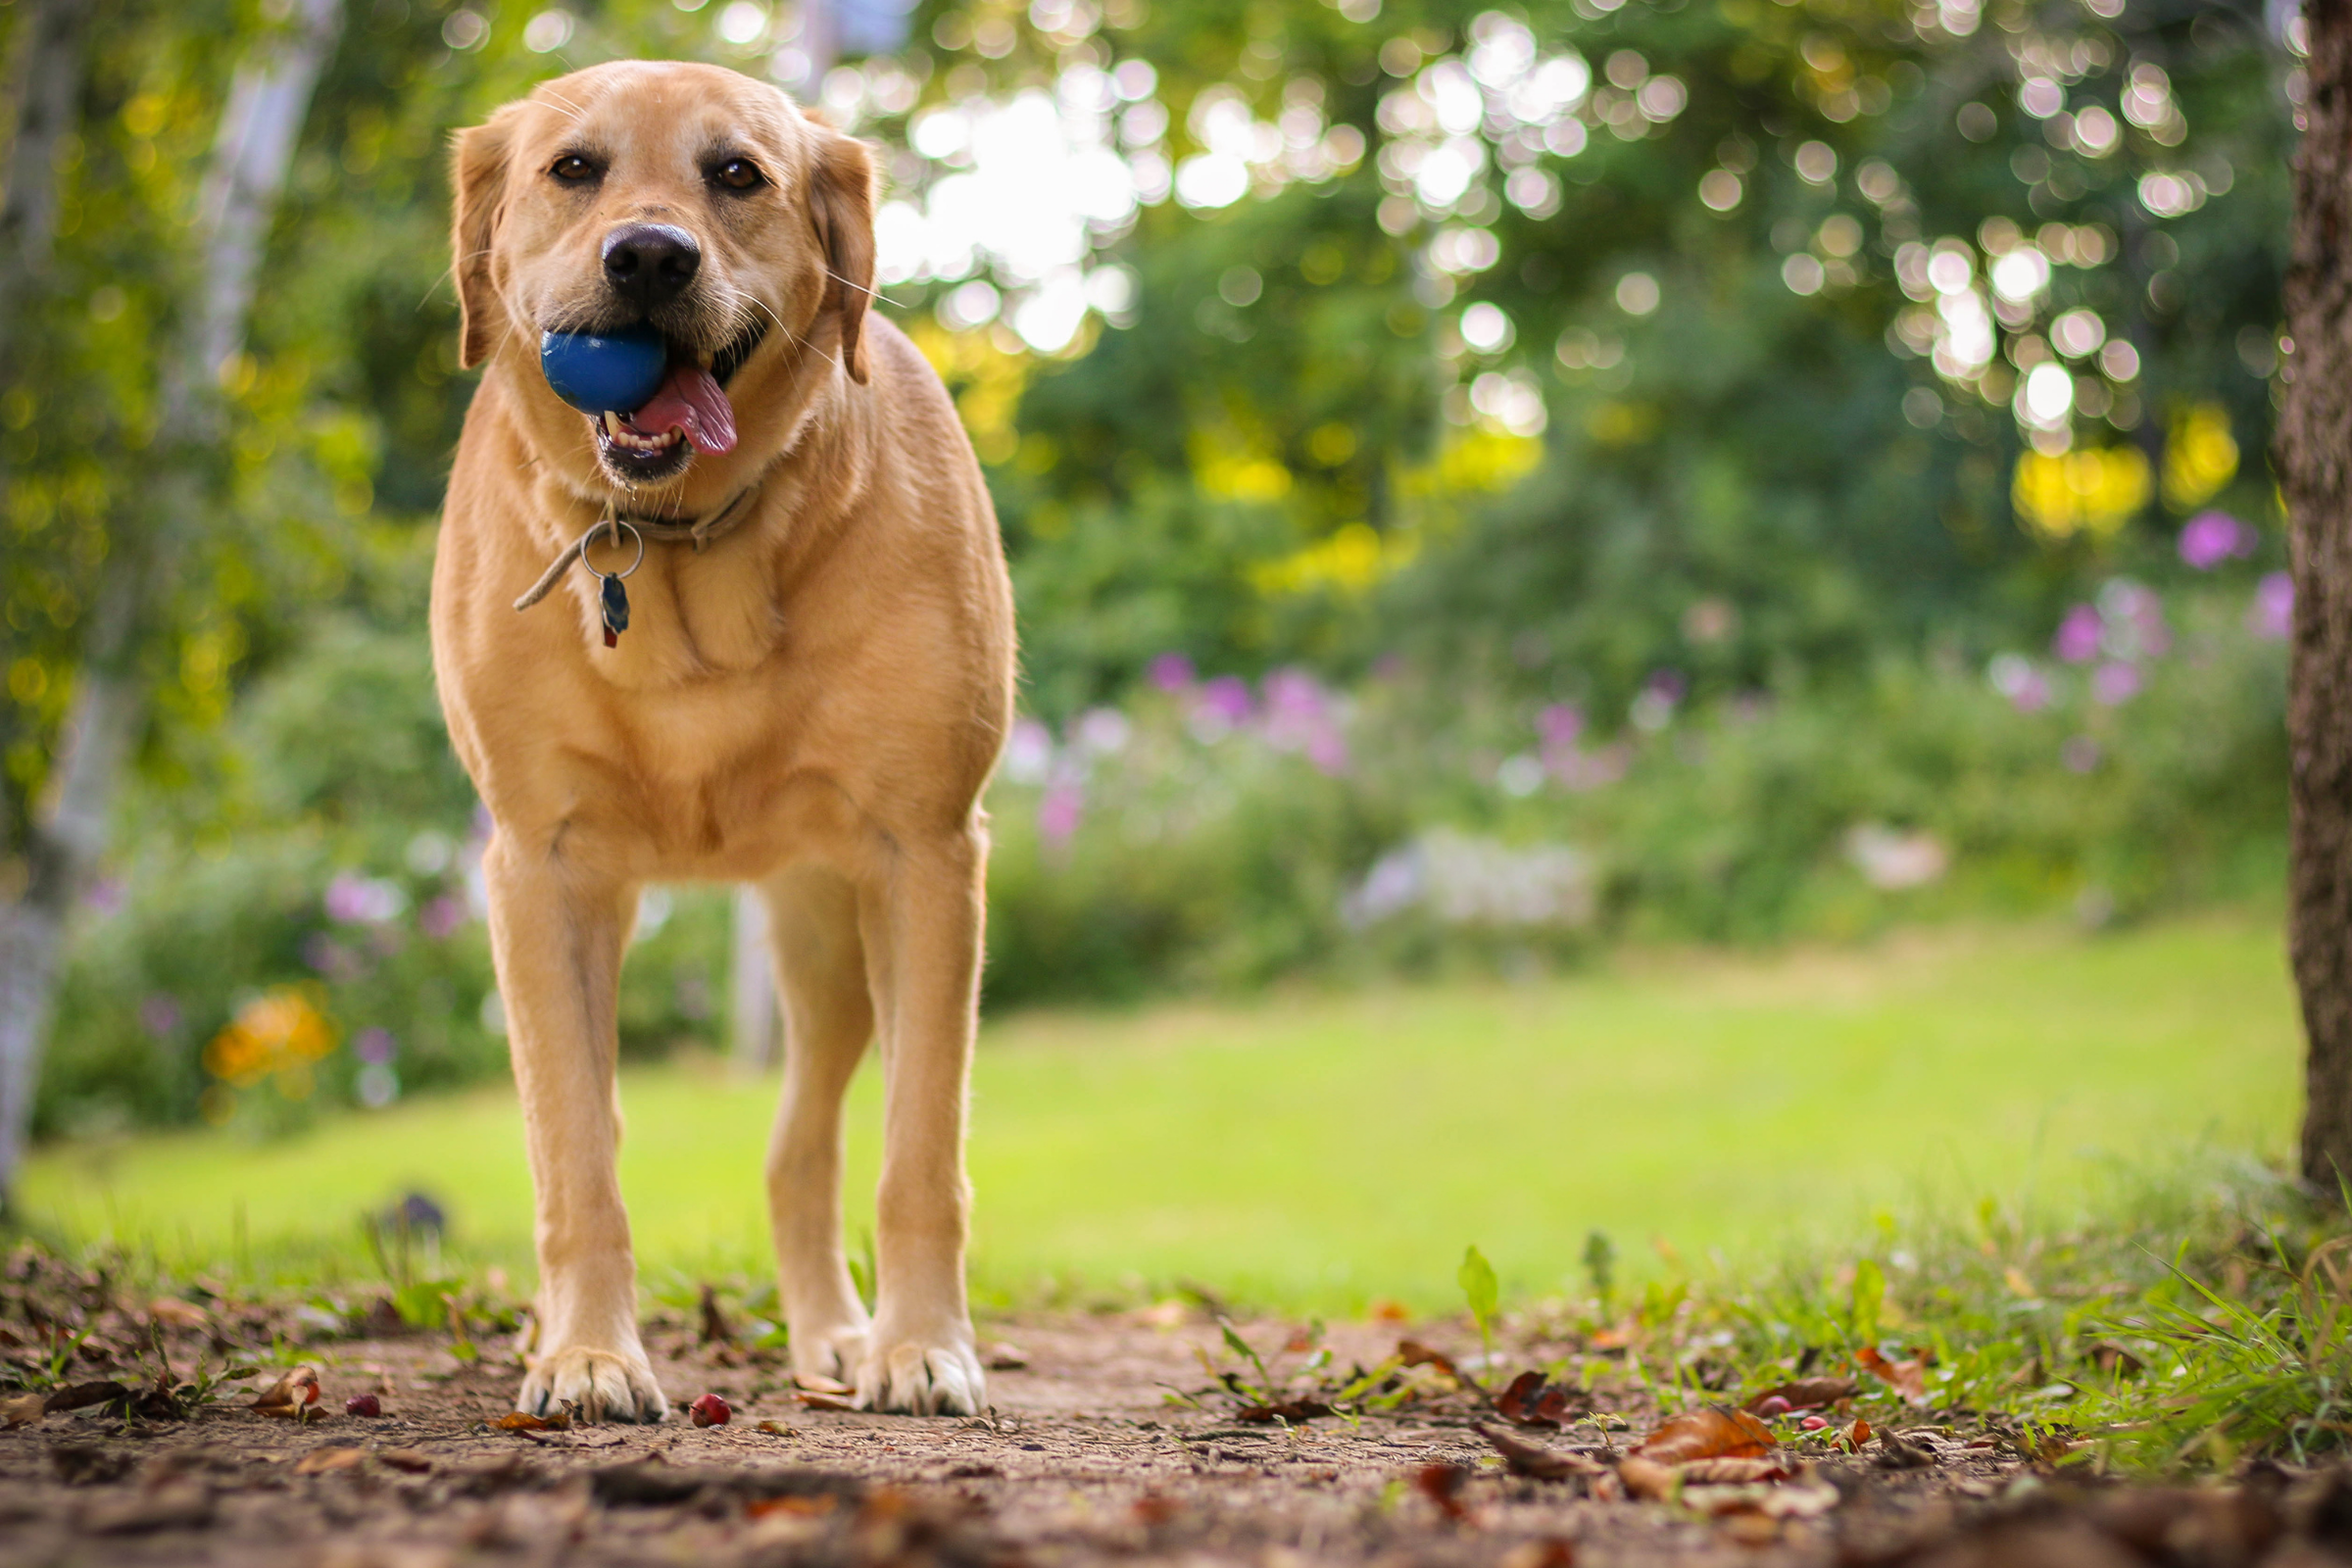 yellow lab dog holding ball in mouth in backyard with green grass